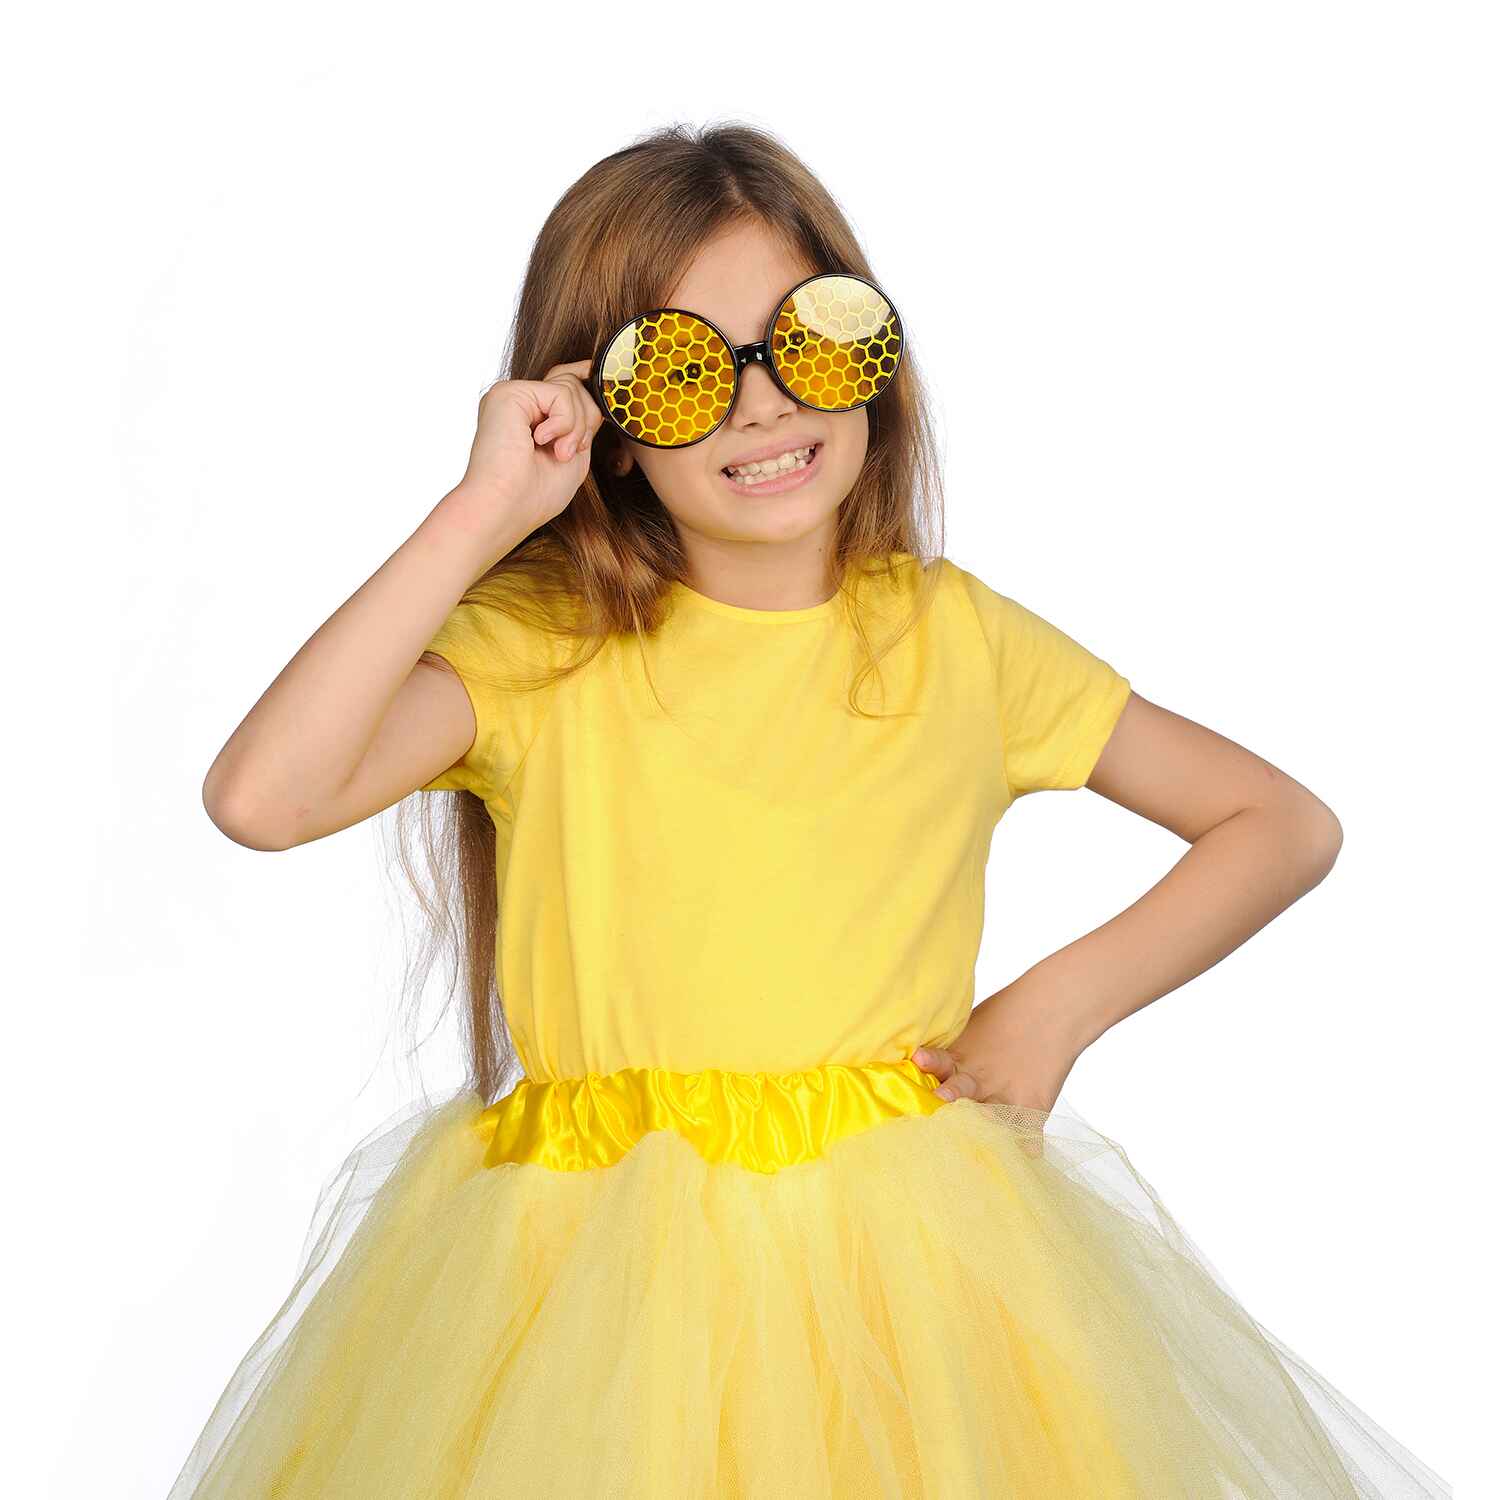 Cute honey bee costume accessories for kids